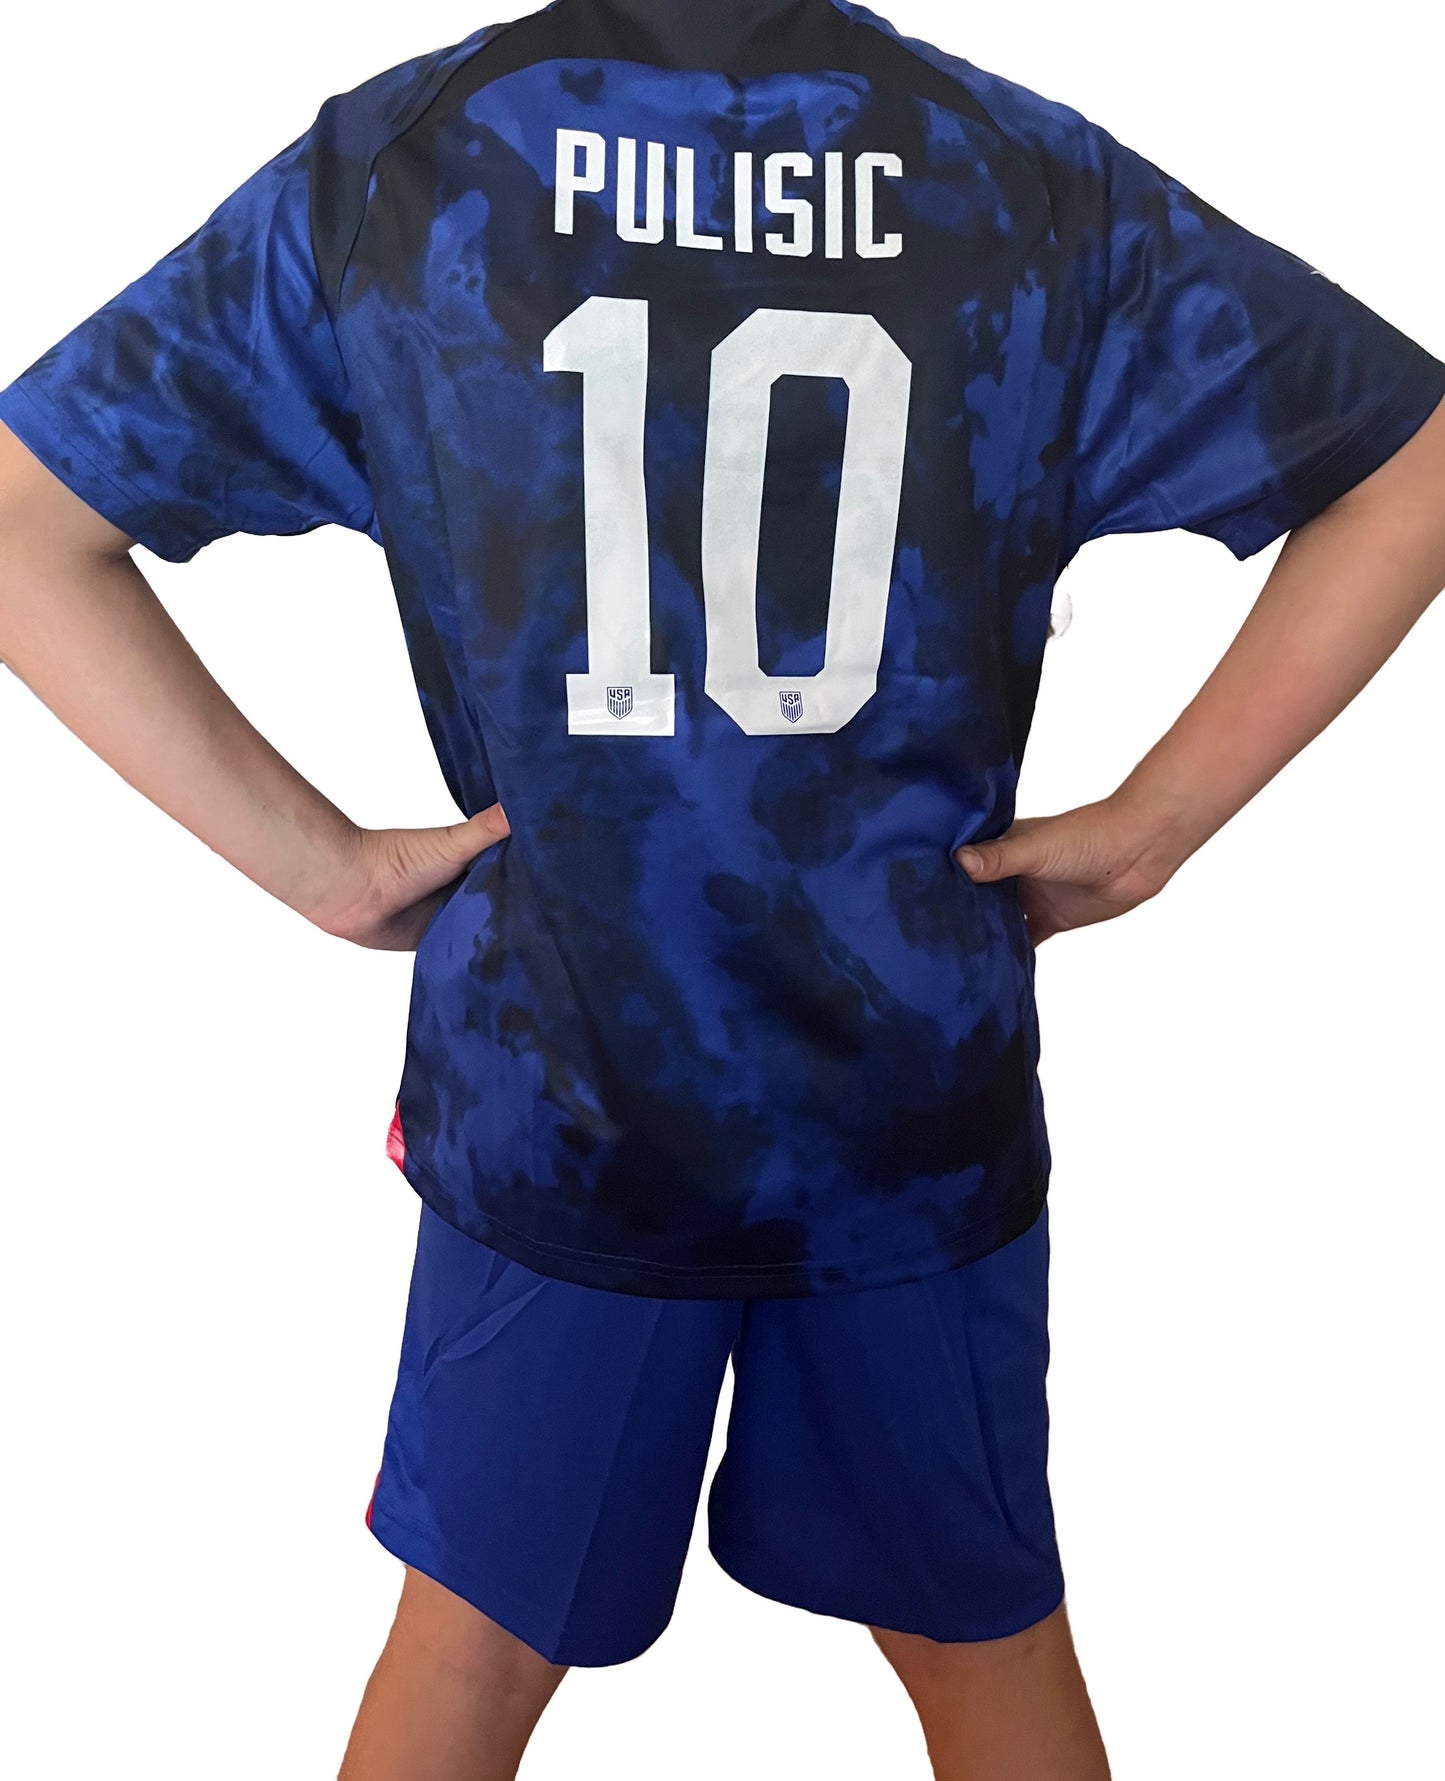 2022 A USA Away (Blue) World Cup Replica Soccer Kit - #10 - Christian Pulisic